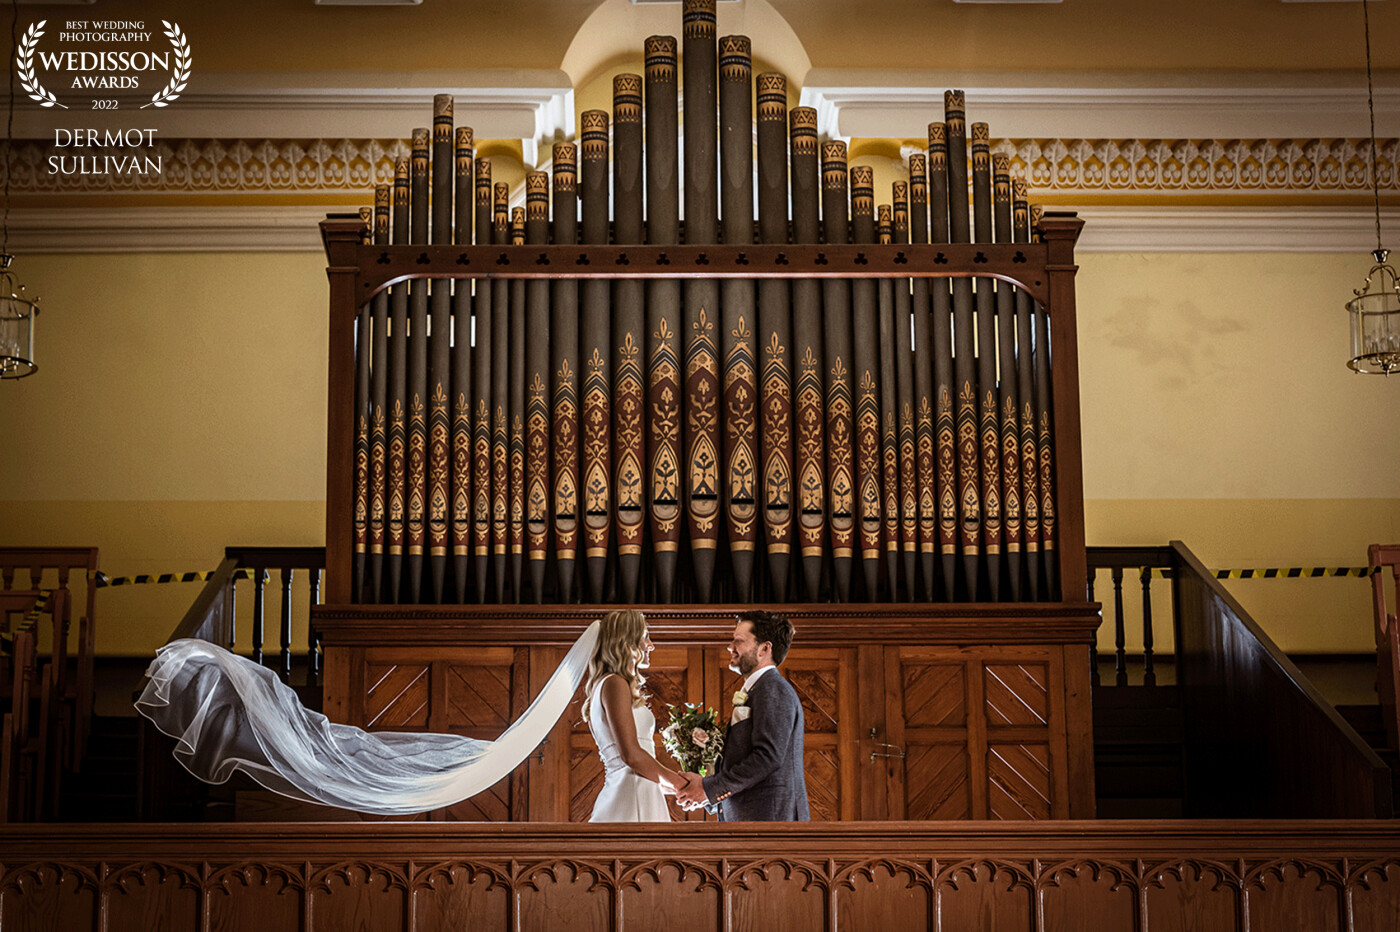 I spotted the organ loft during the ceremony and thought that it would be a great background for a couple shot. The bride and groom were up for a creative photograph, so I positioned a remote flash behind them and got the brides younger brother to flick the veil and then quickly duck down, It took a couple of tries, but we got the photo!